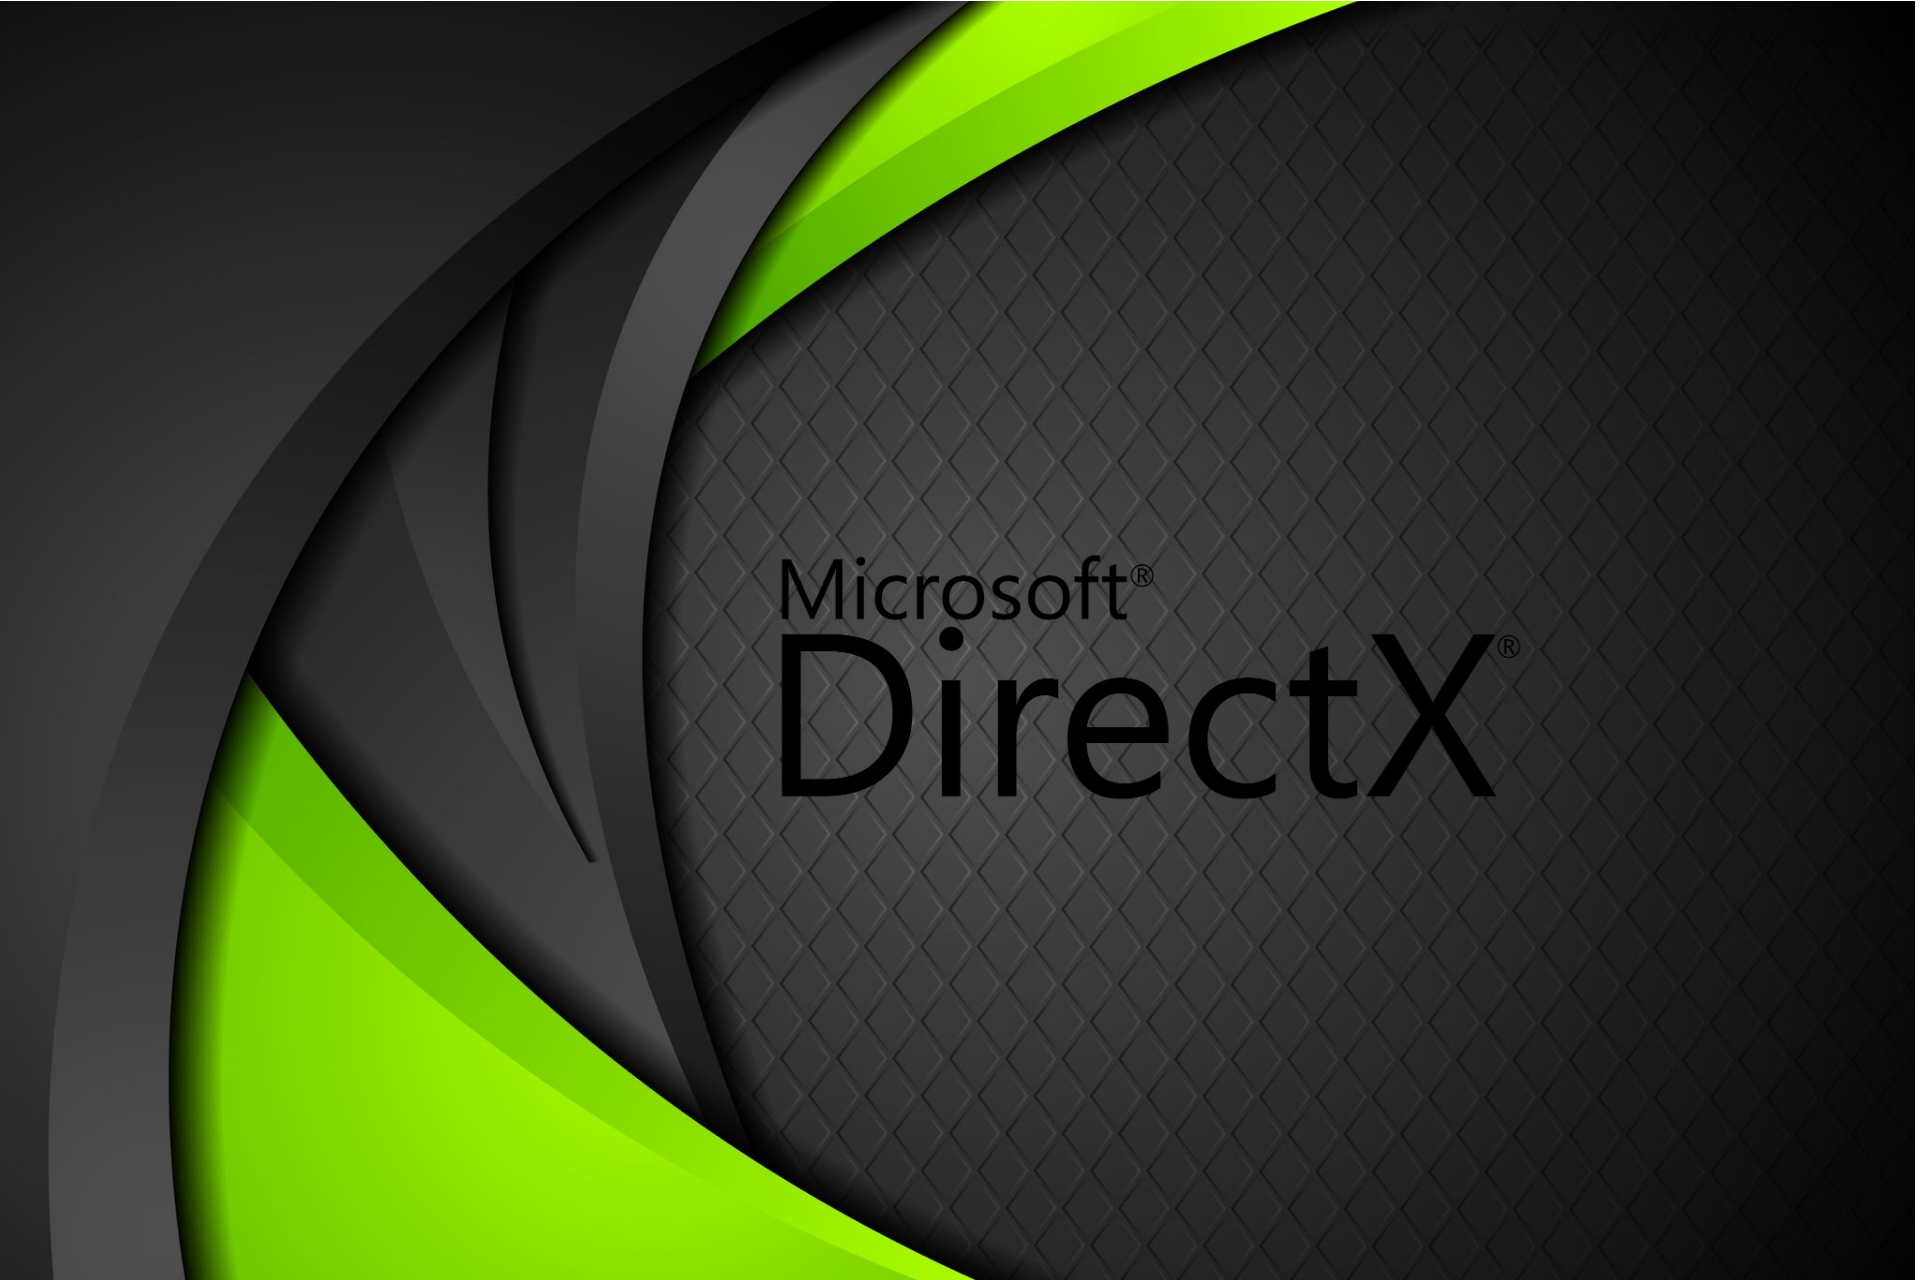 DirectX 11 vs. DirectX 12: What are the differences?